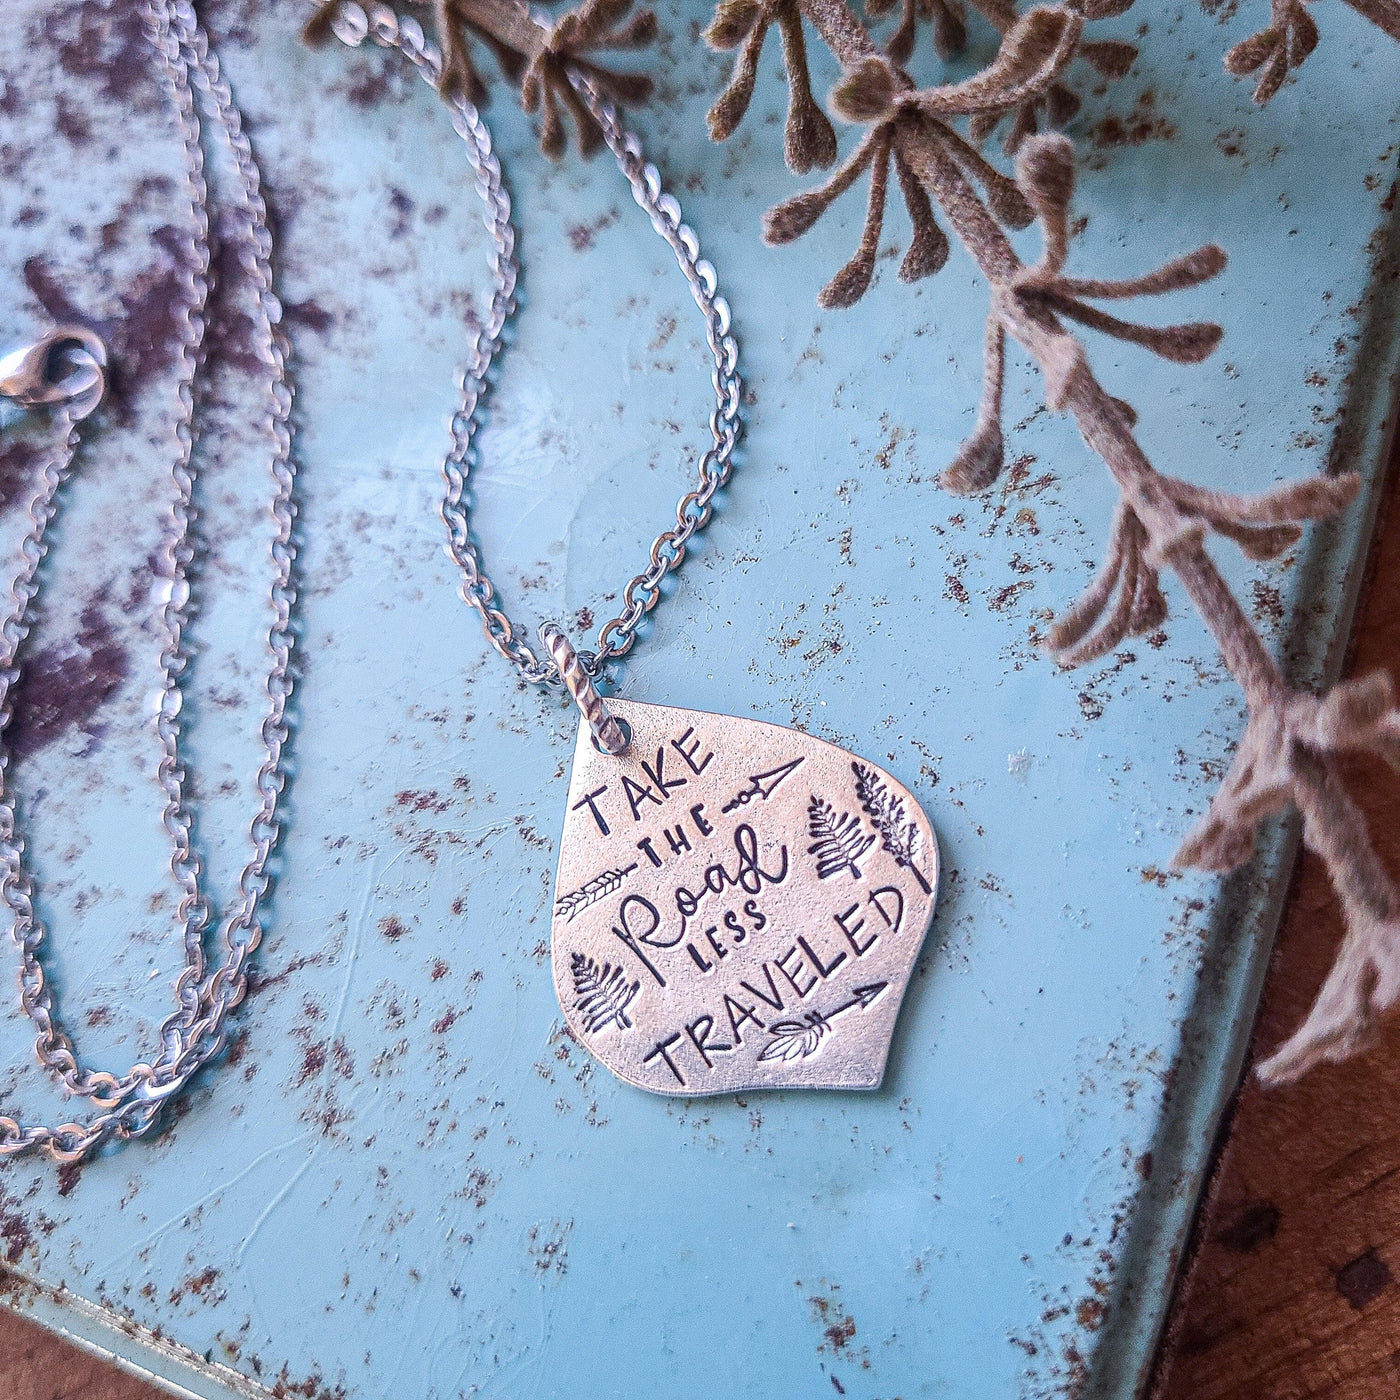 Take the Road Less Traveled - Little Blue Bus Jewelry